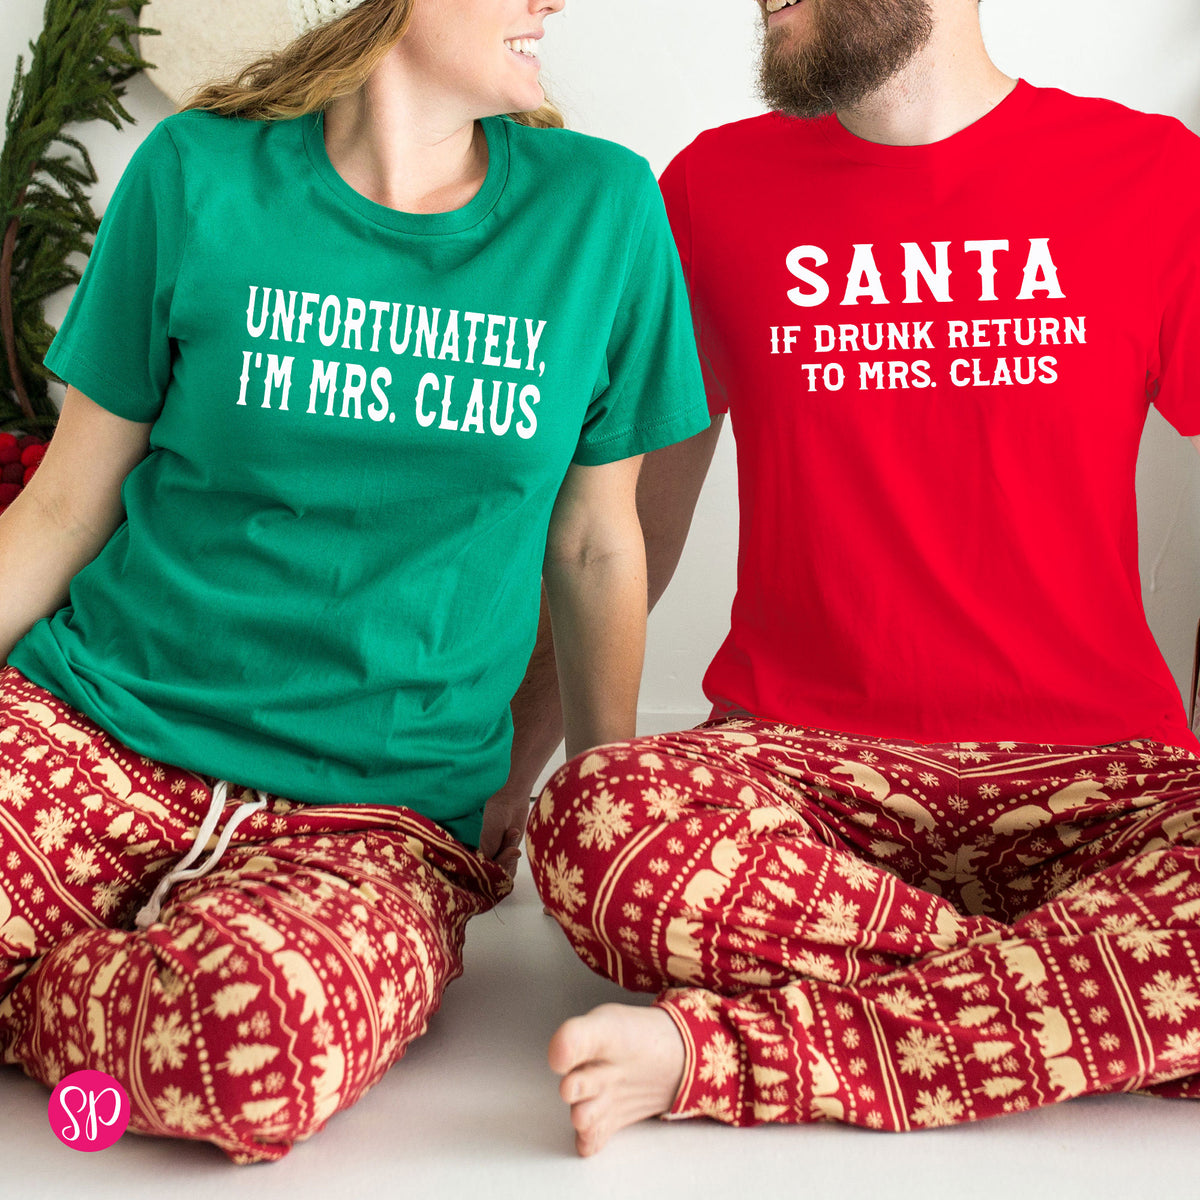 Santa If Drunk Return to Mrs Claus Unfortunately I'm Mrs Claus Drinking Christmas Couples Holiday Graphic Tee Shirt